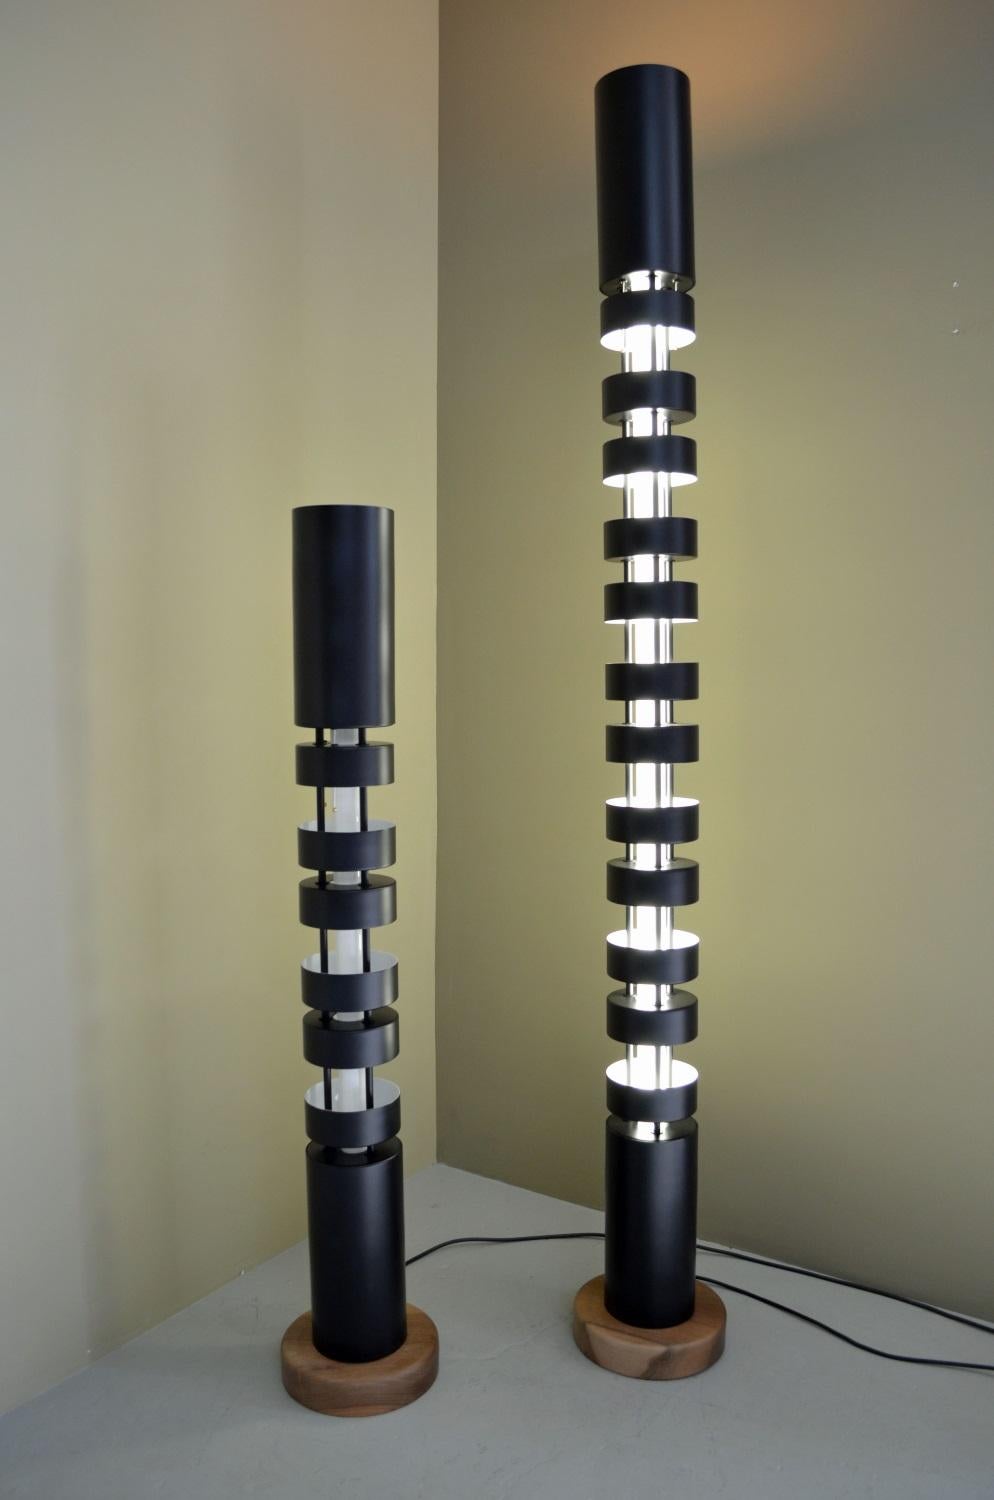 In his post black shapes period, Serge Mouille experimented with color and columns. With the TOTEM, he stacked cylindrical shades around a central lighting element. By alternating the shades up or down, the light’s intensity is not uniform by